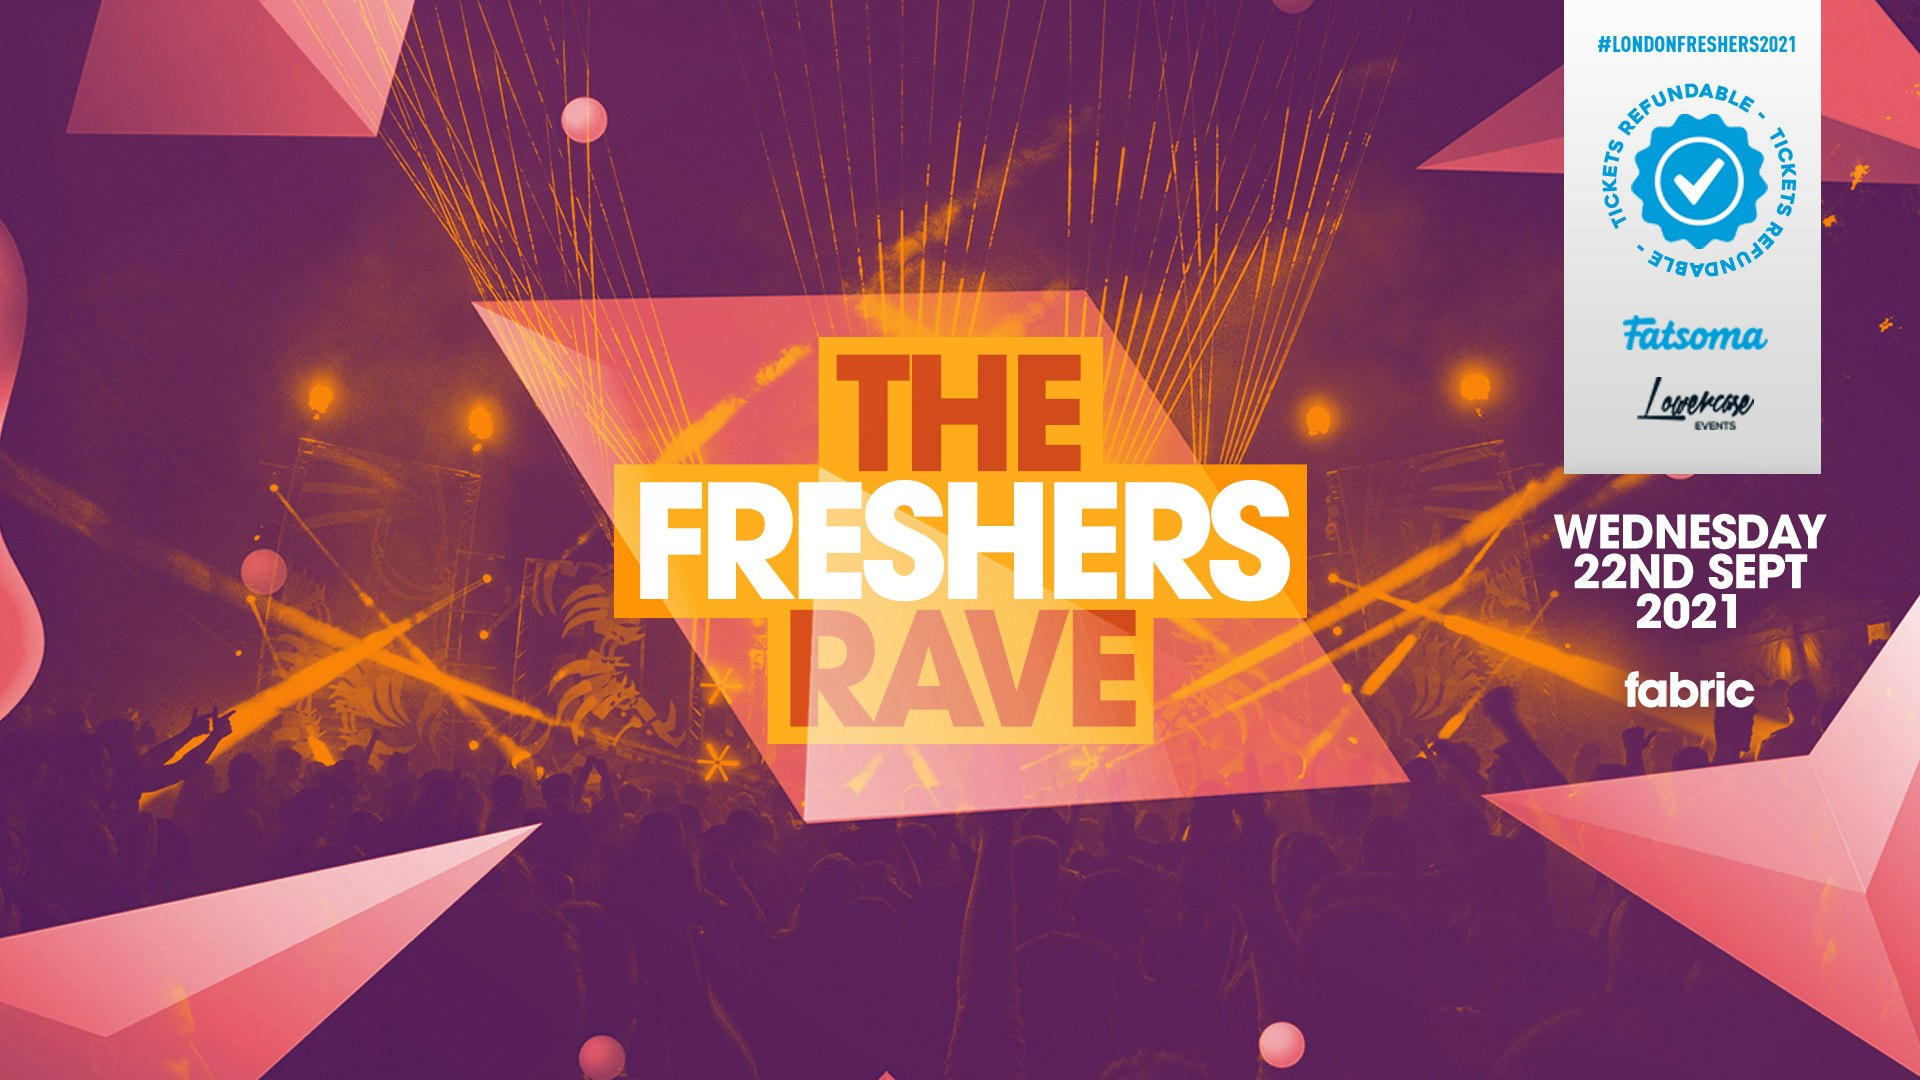 ⚠️LAST 100 TICKETS⚠️ – THE 2021 FRESHERS RAVE TONIGHT! // FRESHERS WEEK 1 DAY 4